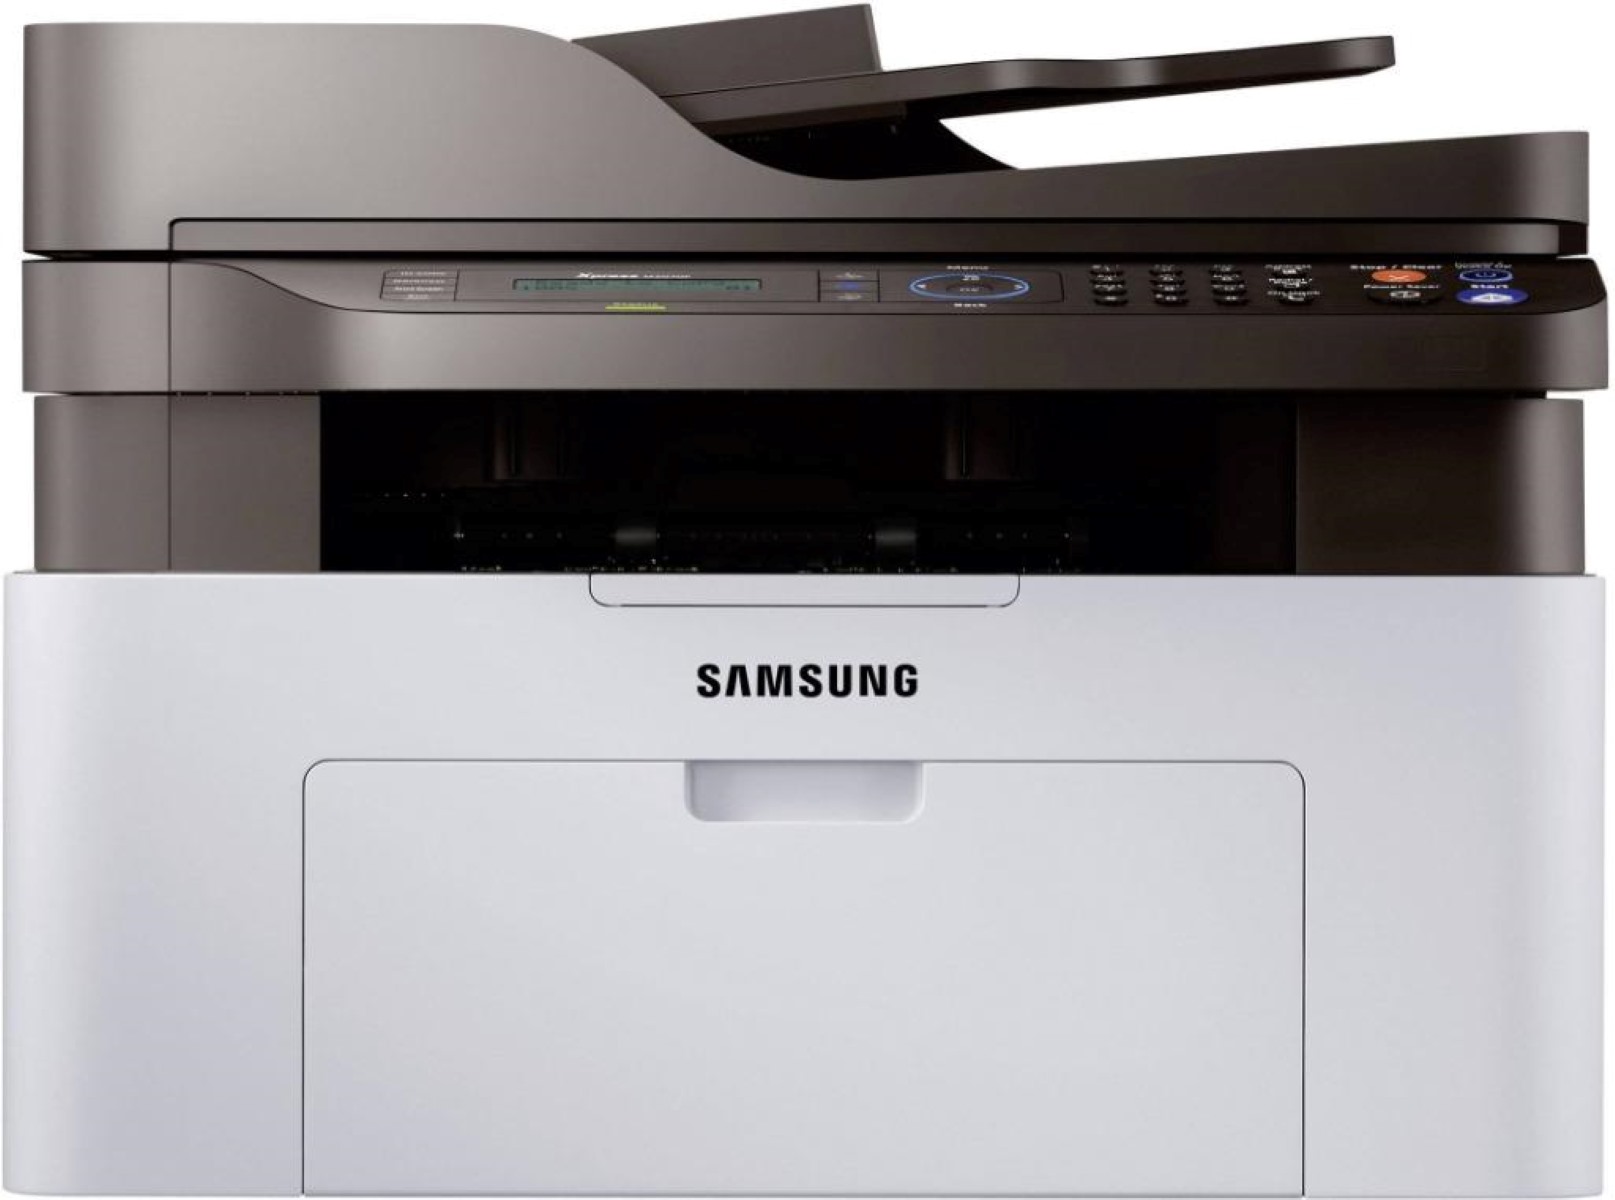 Where To Find The Wps Pin On A Samsung Printer